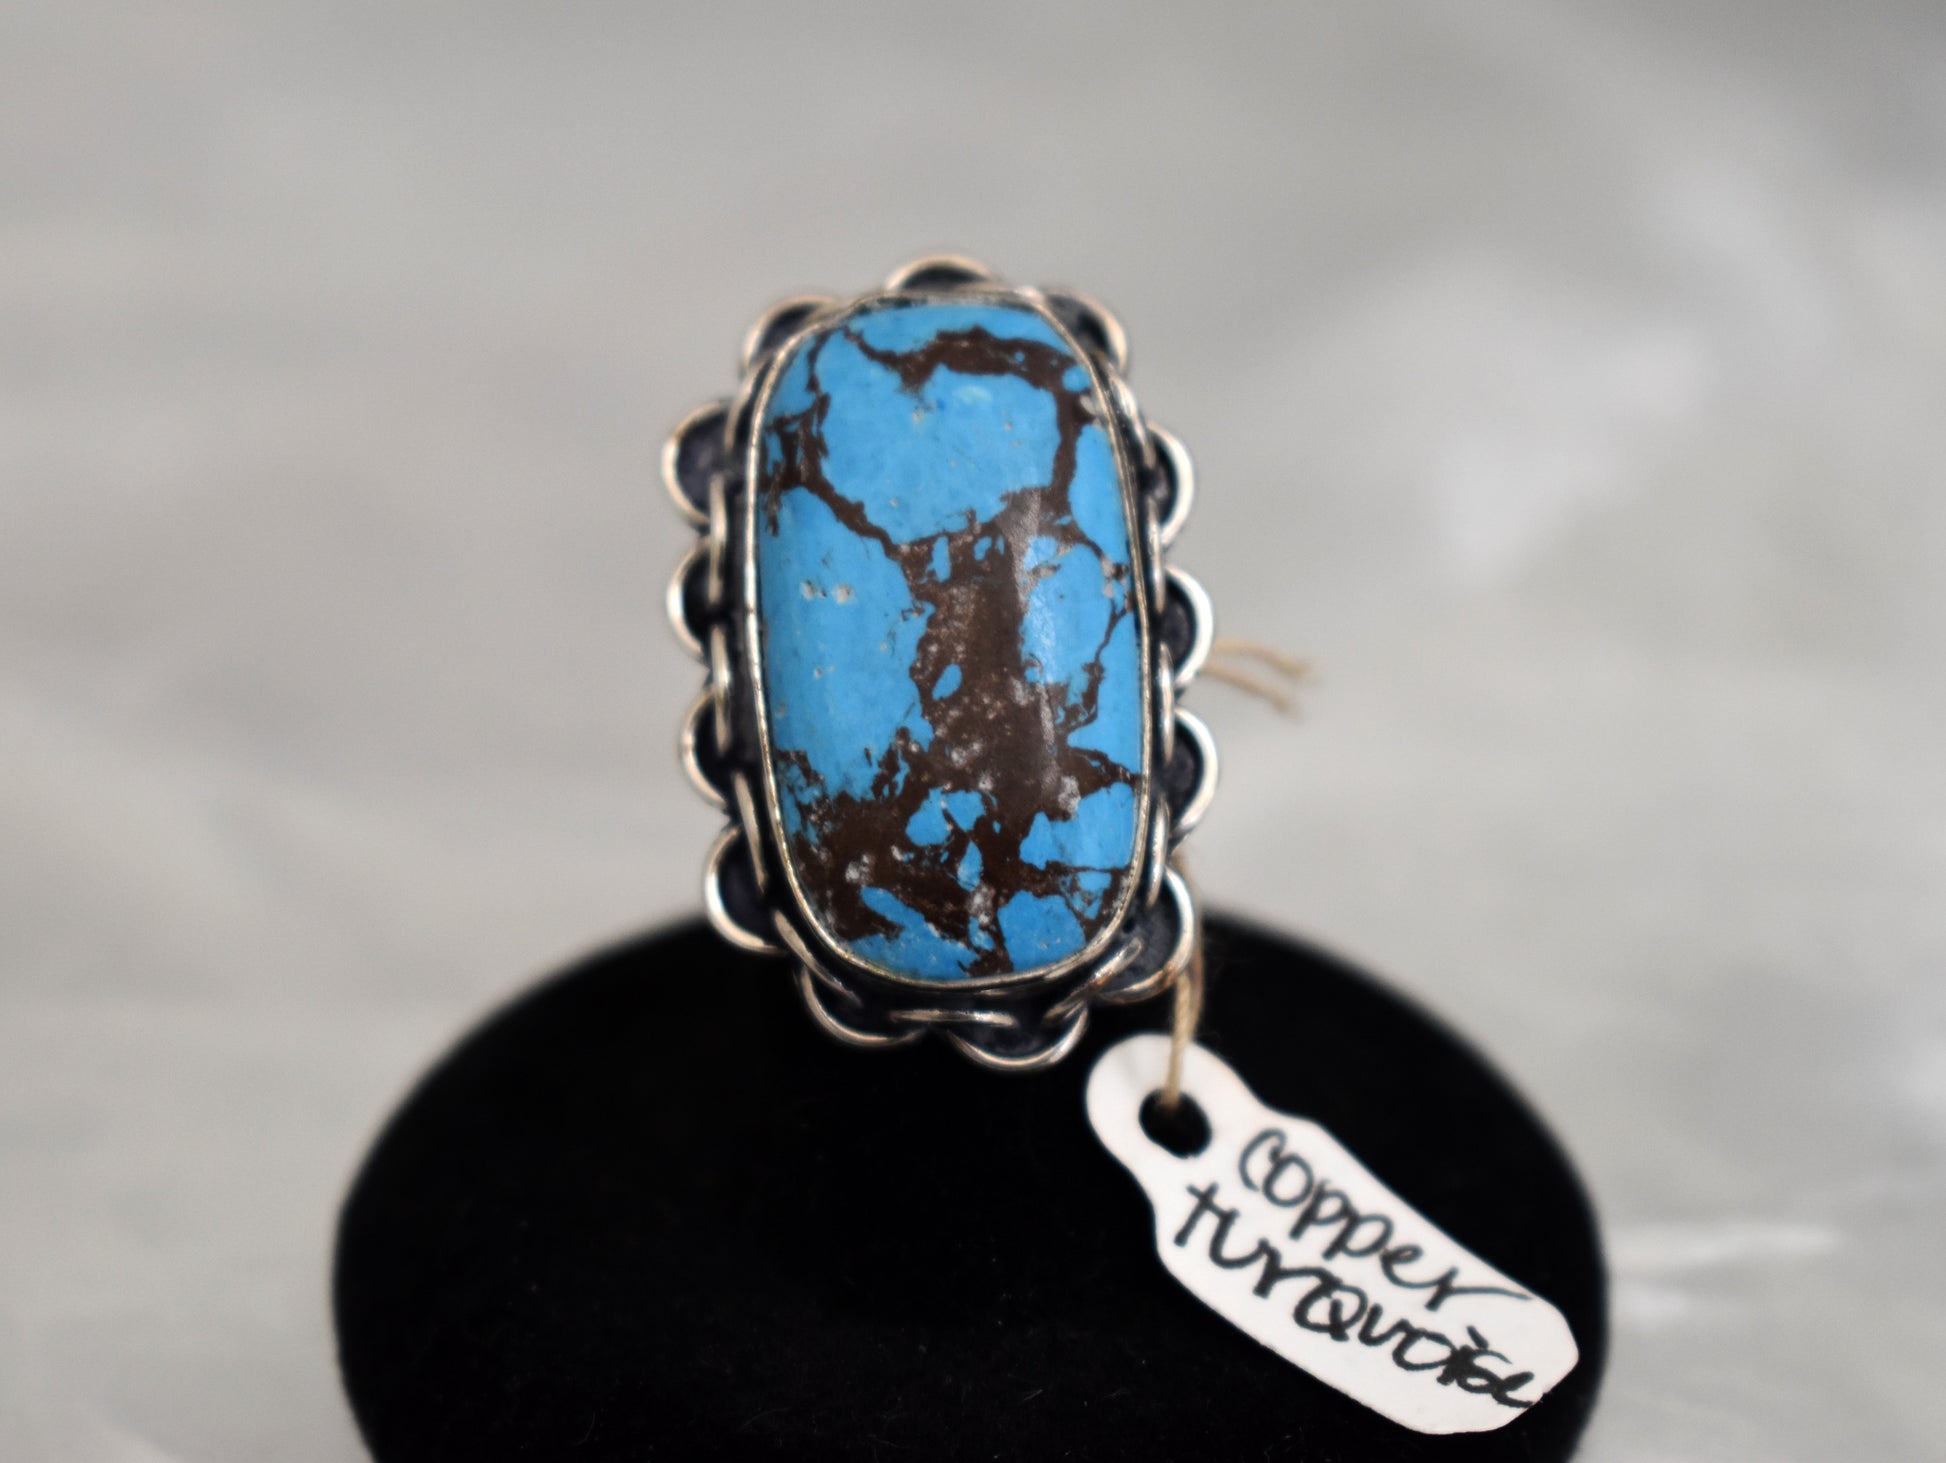 stones-of-transformation - Blue Copper Turquoise (Ring 6) - Stones of Transformation - 